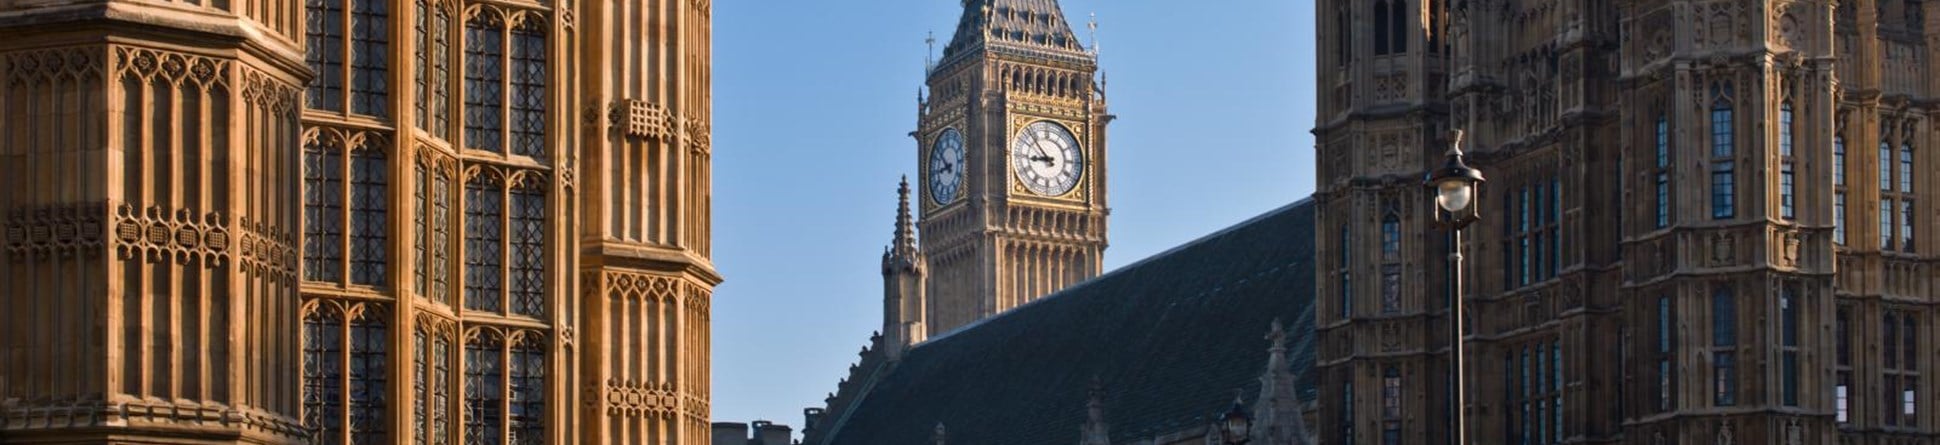 St Stephen's Clocktower, Palace of Westminster, Parliament Square, Westminster, London.